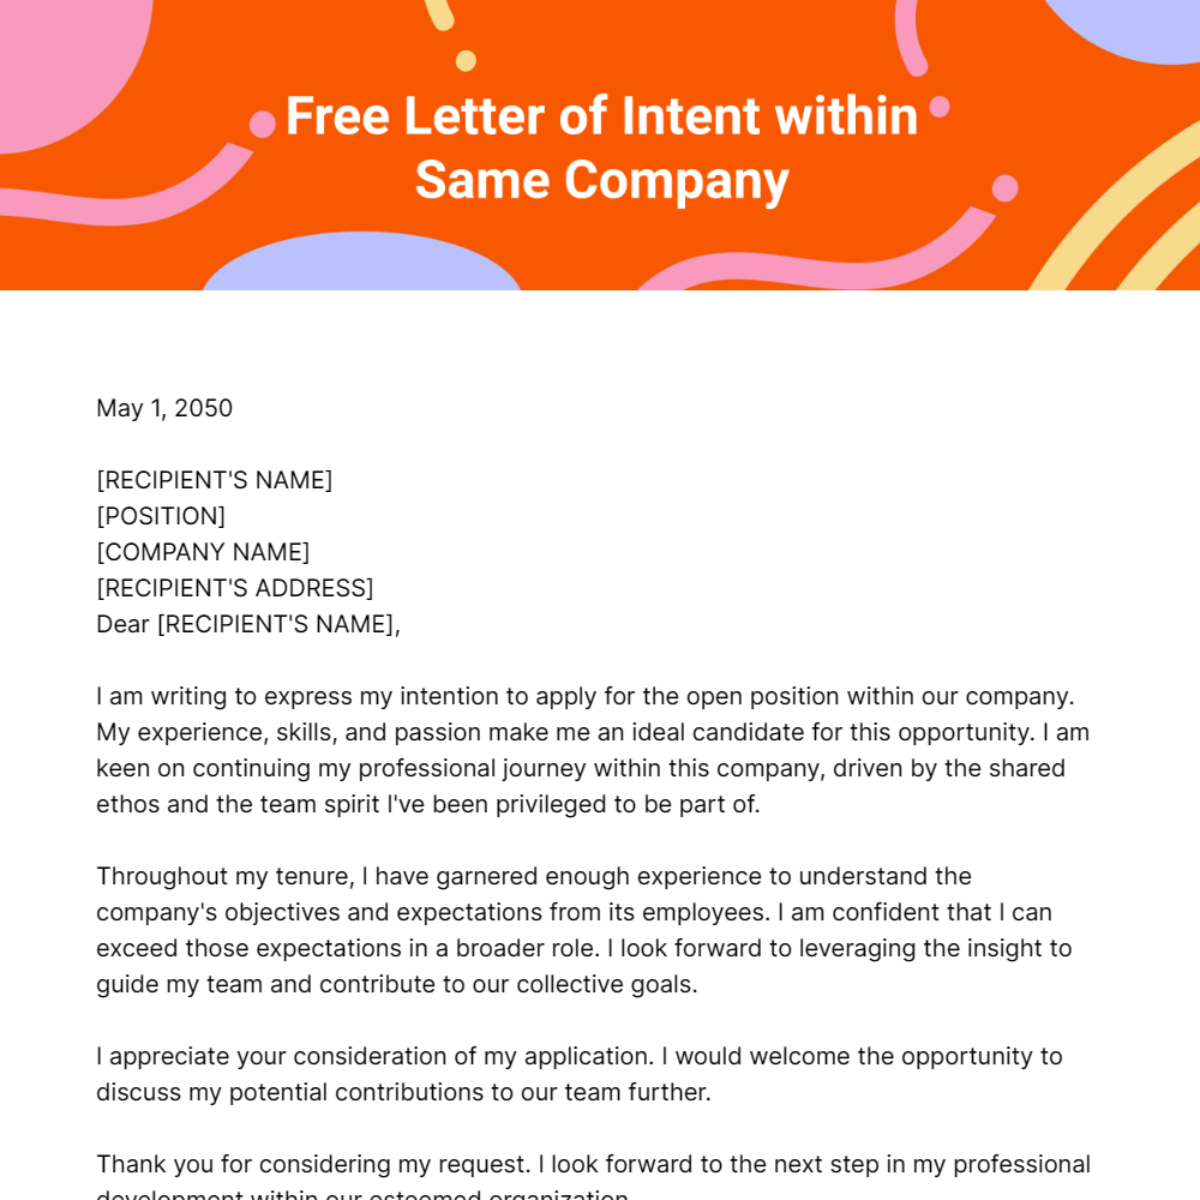 Letter of Intent within Same Company Template